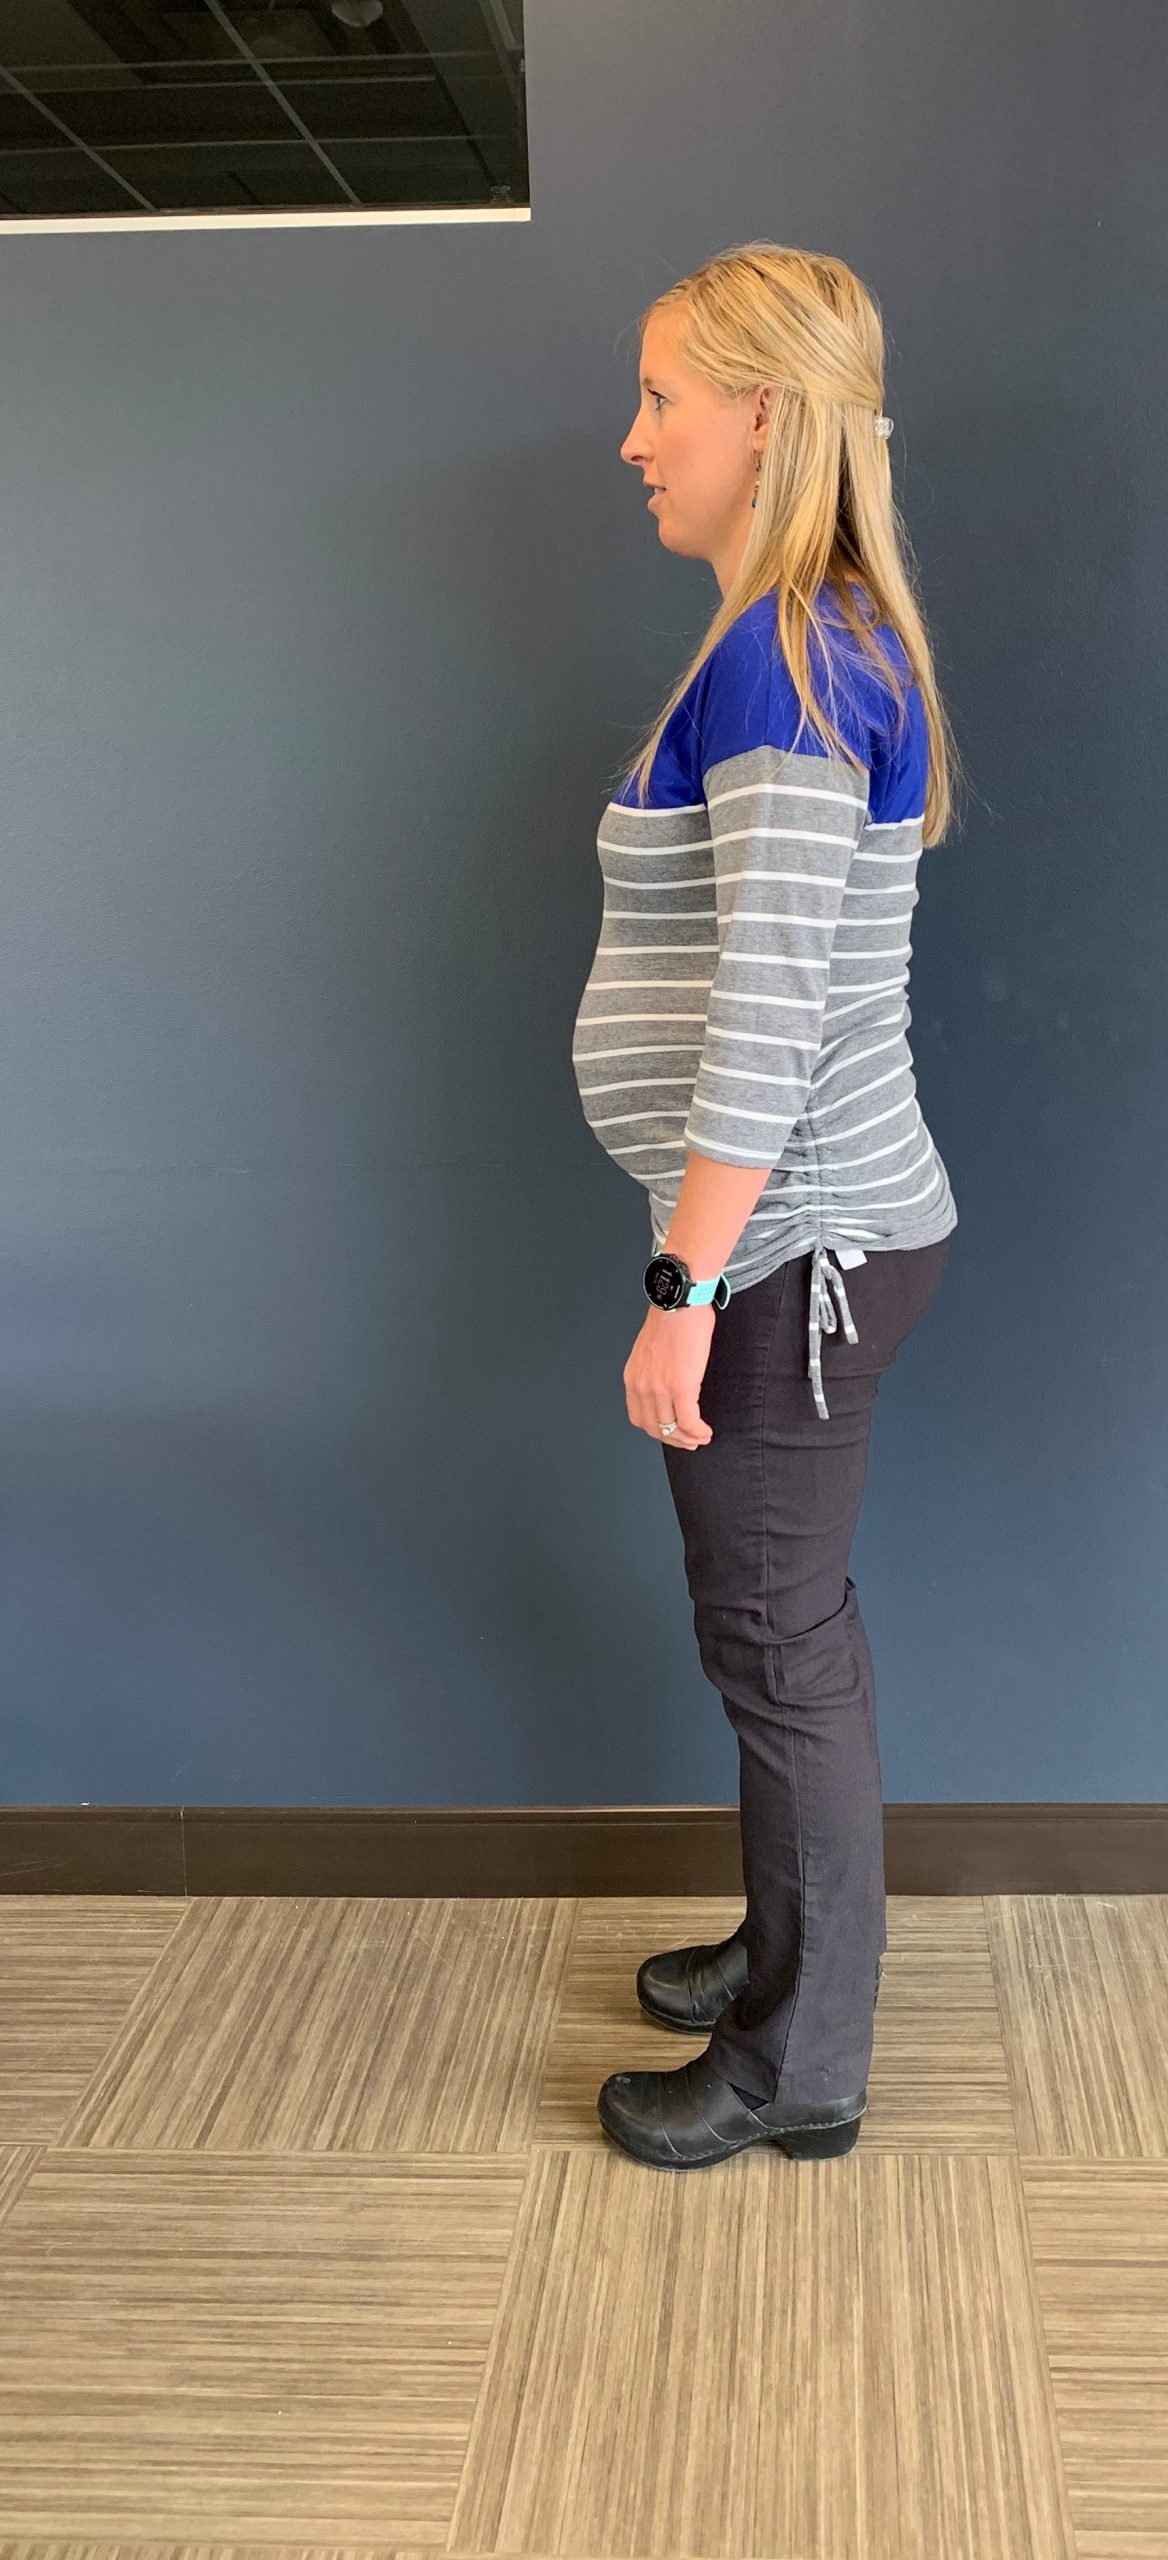 Mama Stance – Tips For Correct Body Mechanics & Posture During Pregnancy